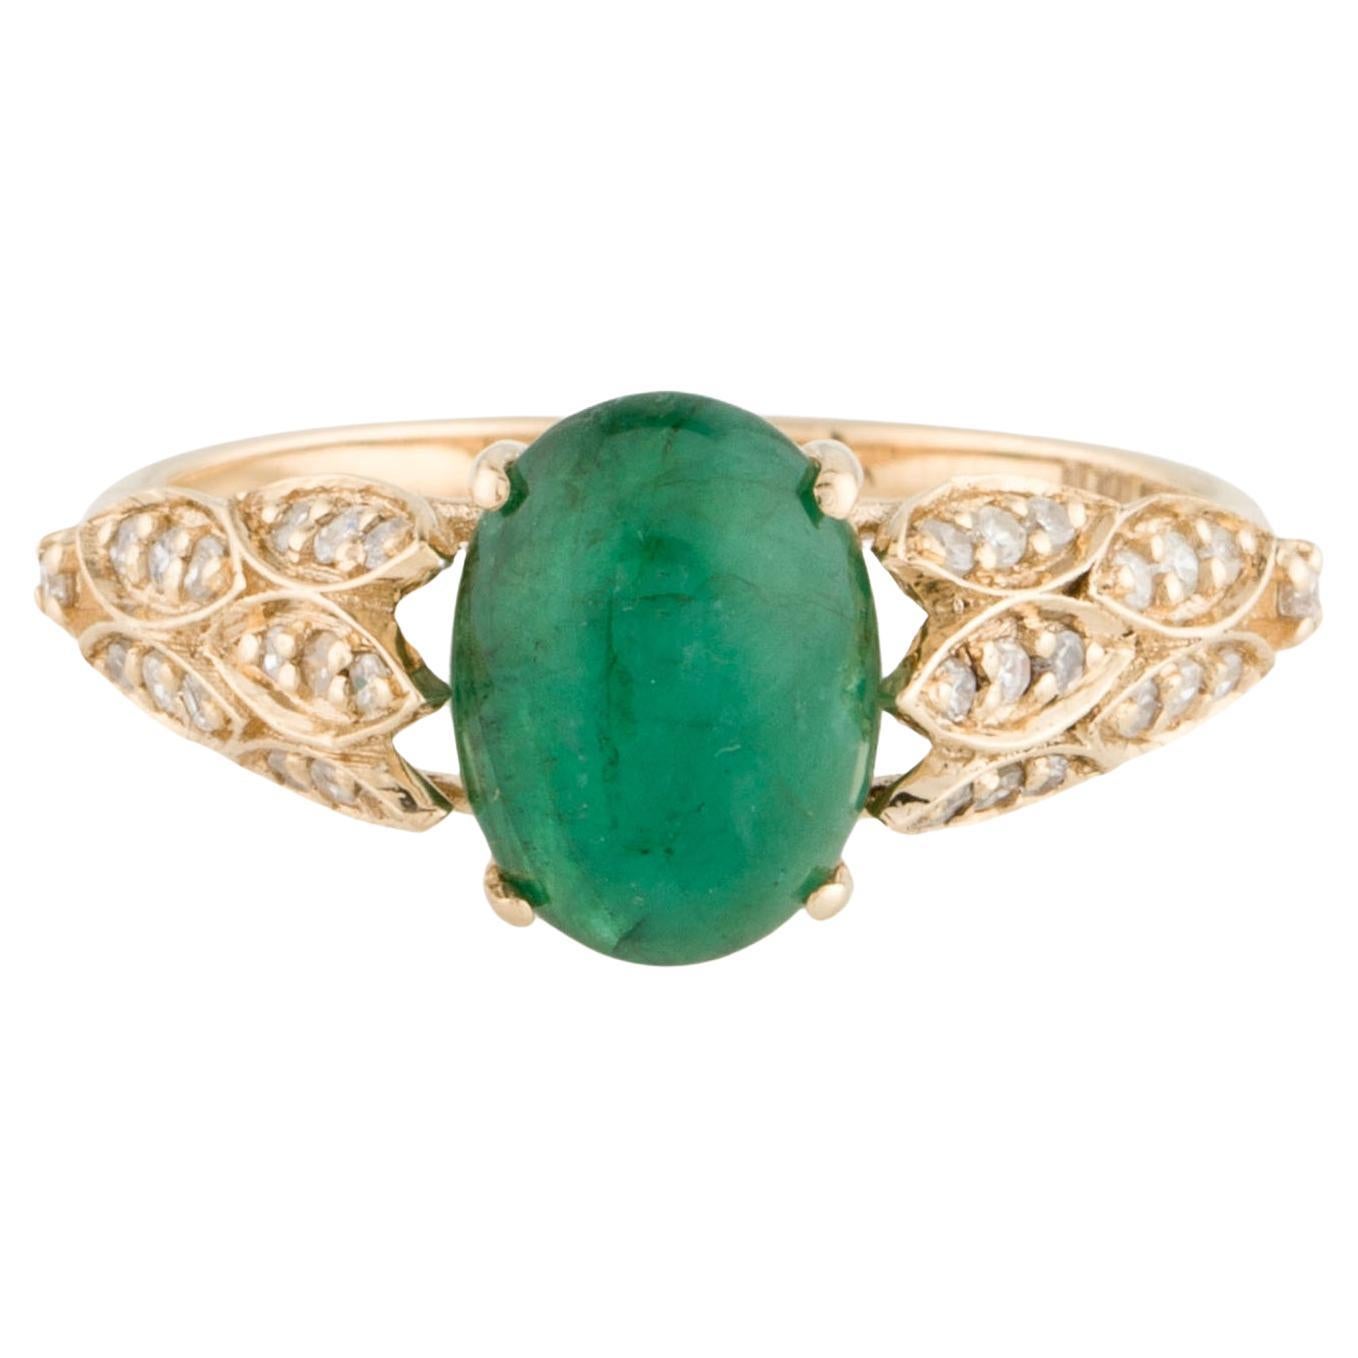 Luxurious 14K Emerald & Diamond Cocktail Ring - 2.90ct Gemstone - Size 8 For Sale